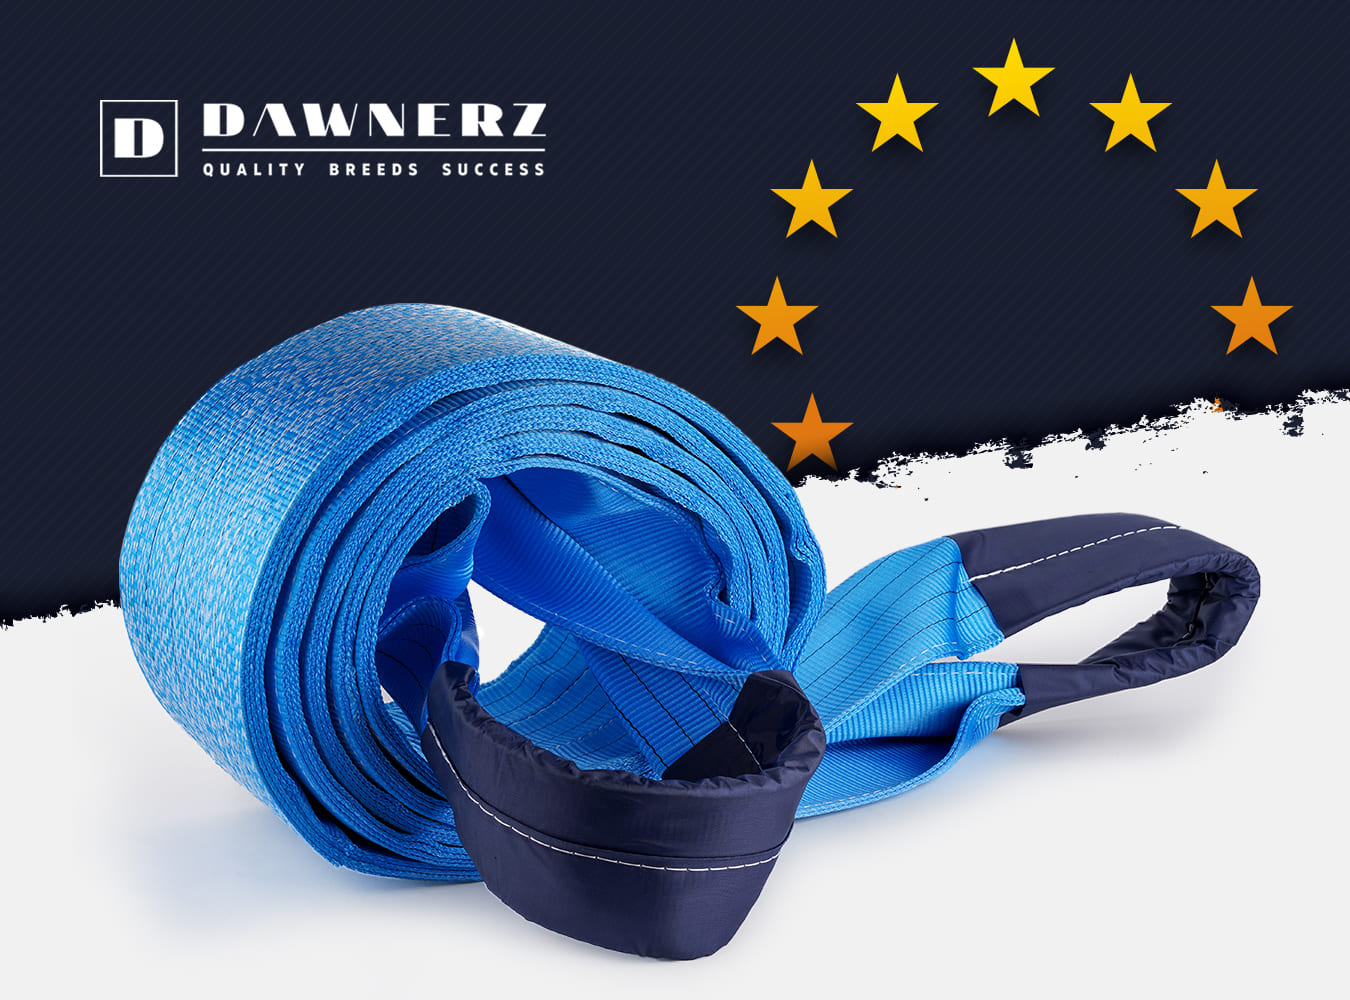 Dawnerz European made recovery straps